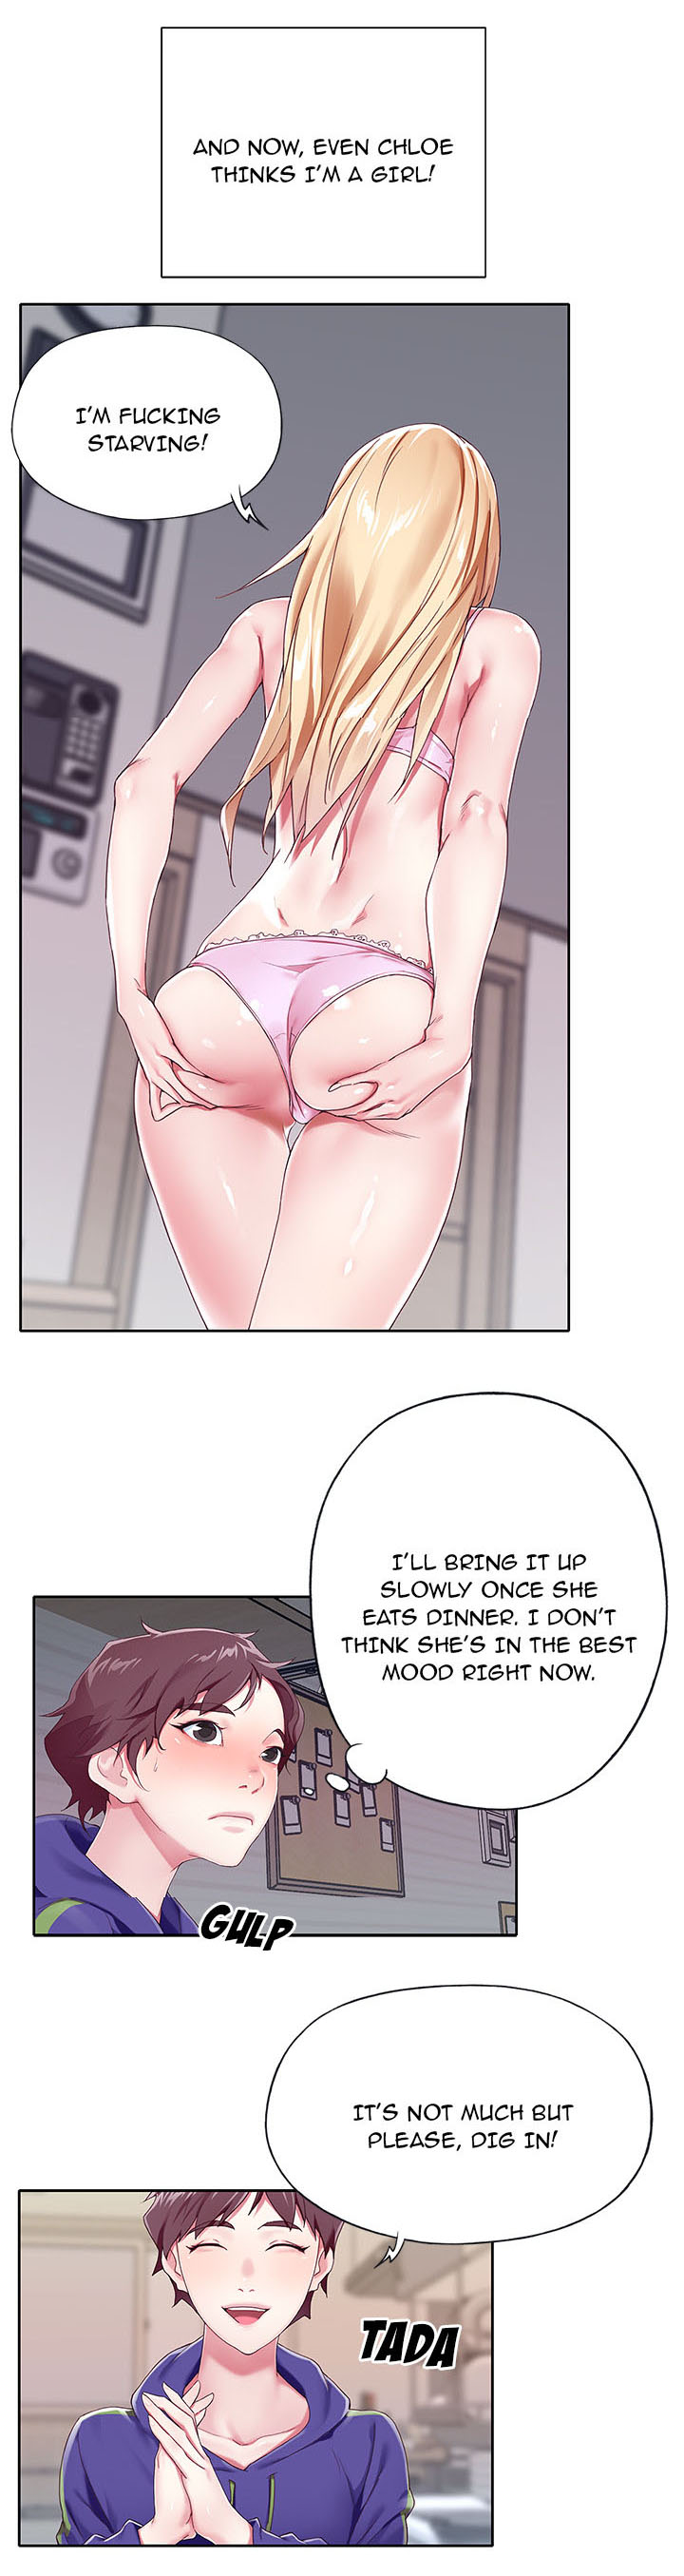 [Viagra, Beck] The Idol Project Ch.1/? [English] [Hentai Universe]